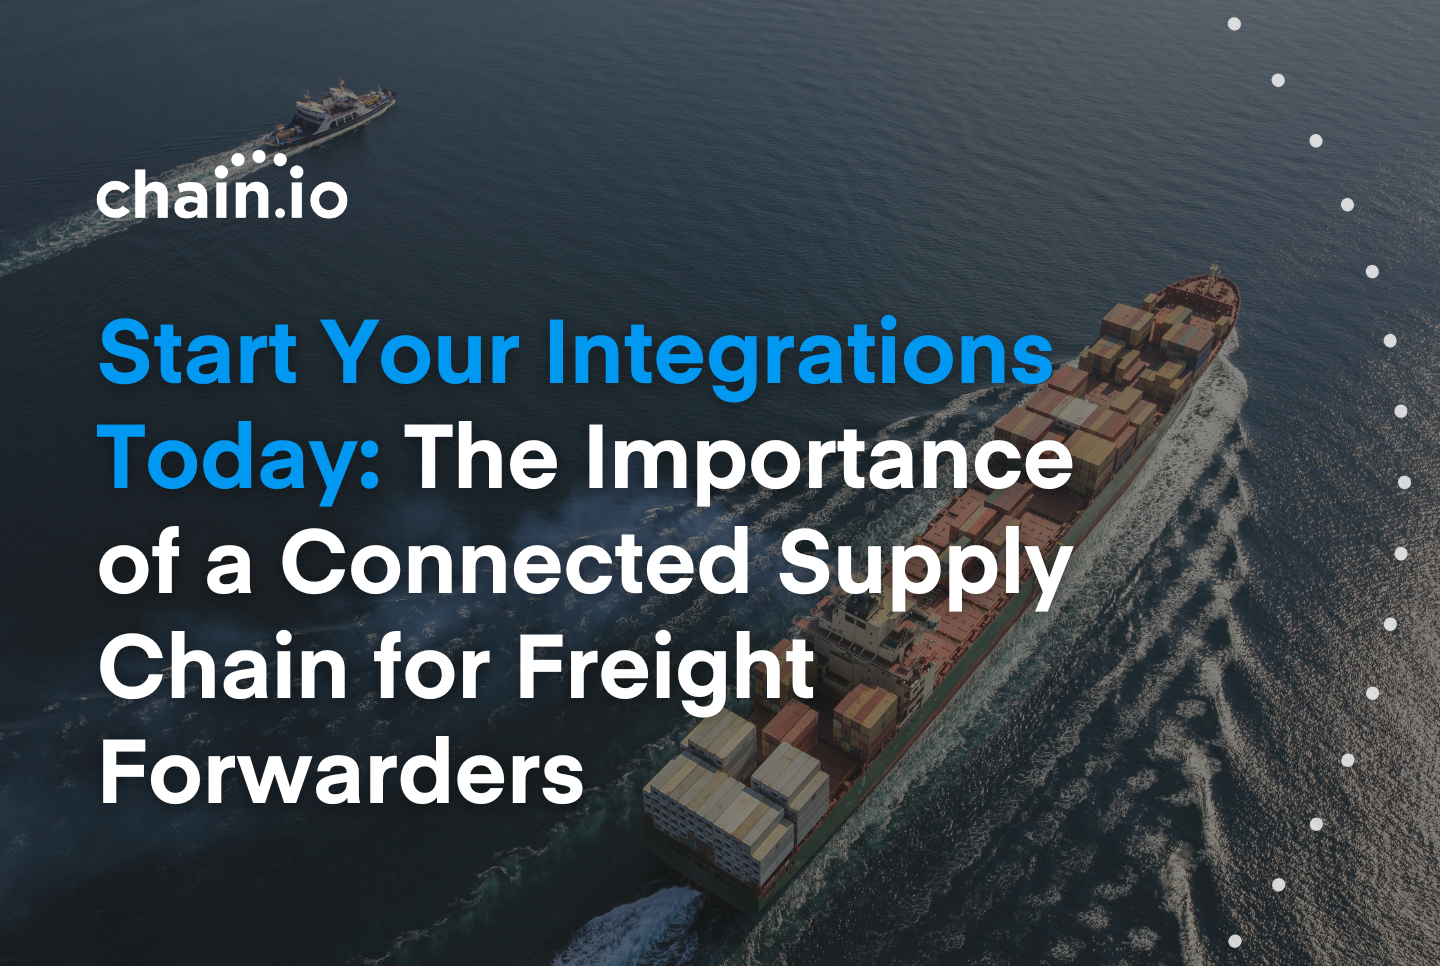 Cargo ship moving into port with text overlay "start your integrations today: the importance of a connected supply chain for freight forwarders"